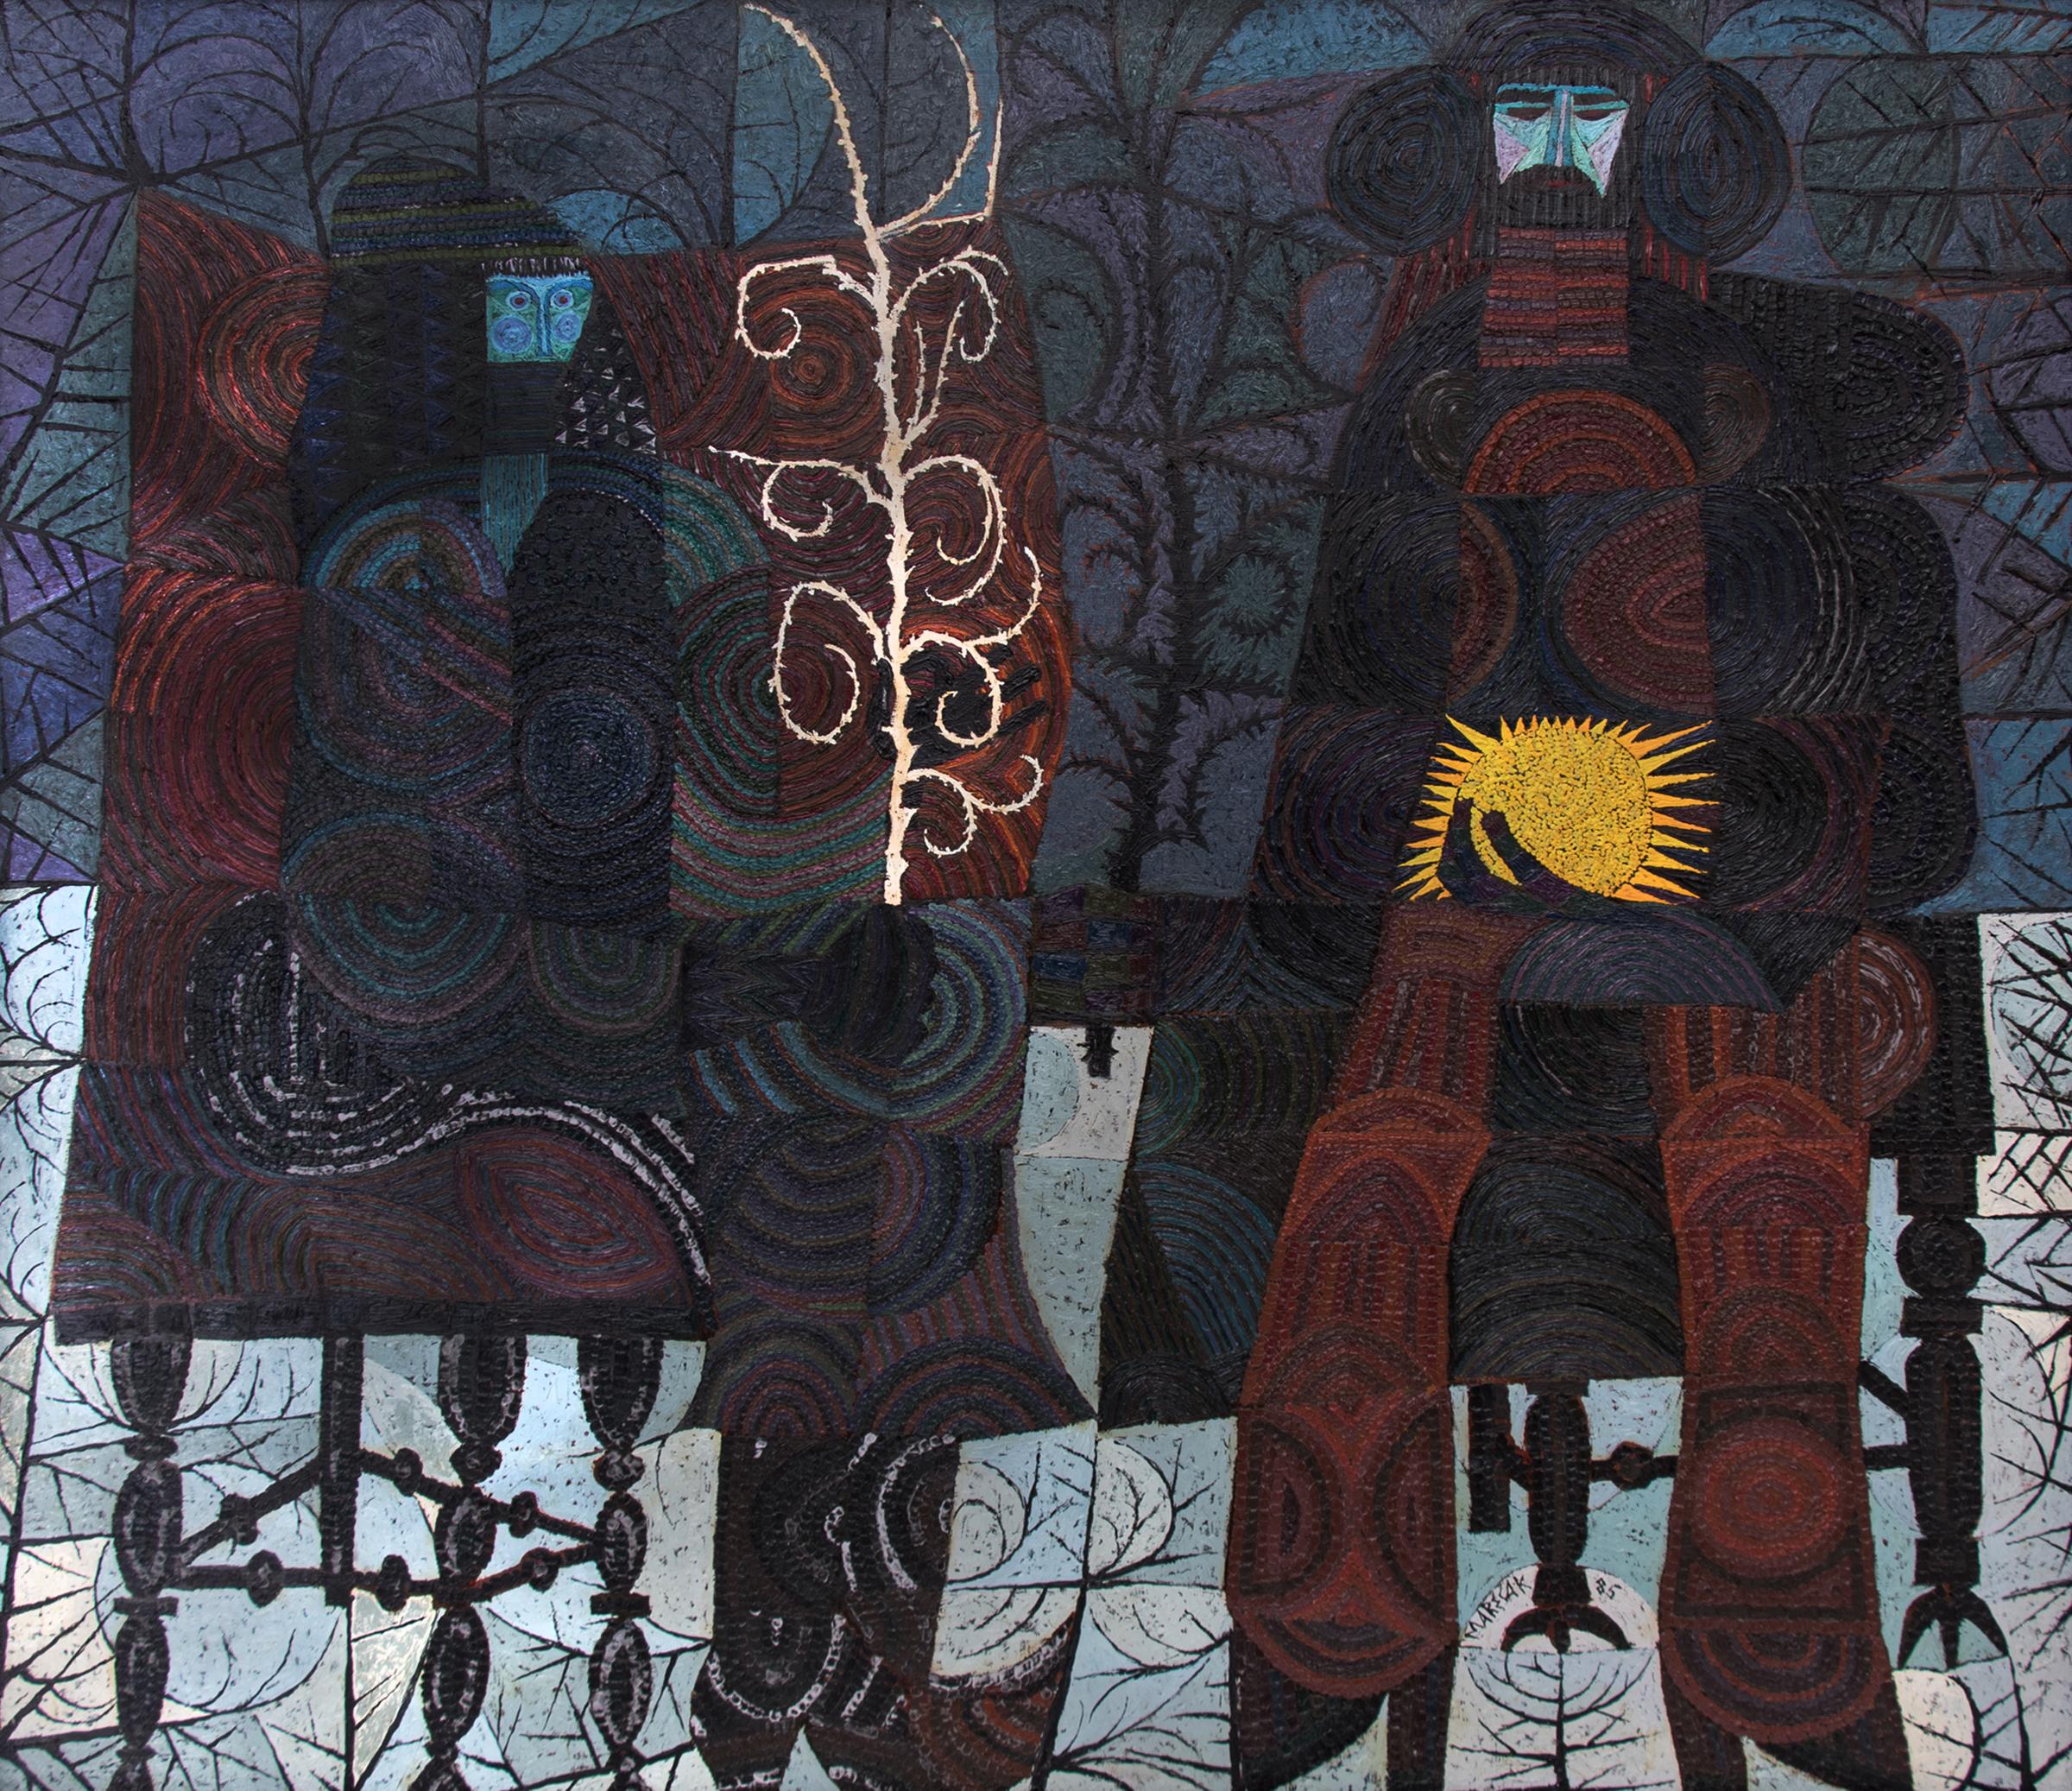 Winter Witches Contemplating the Return of Spring - Painting by Edward Marecak